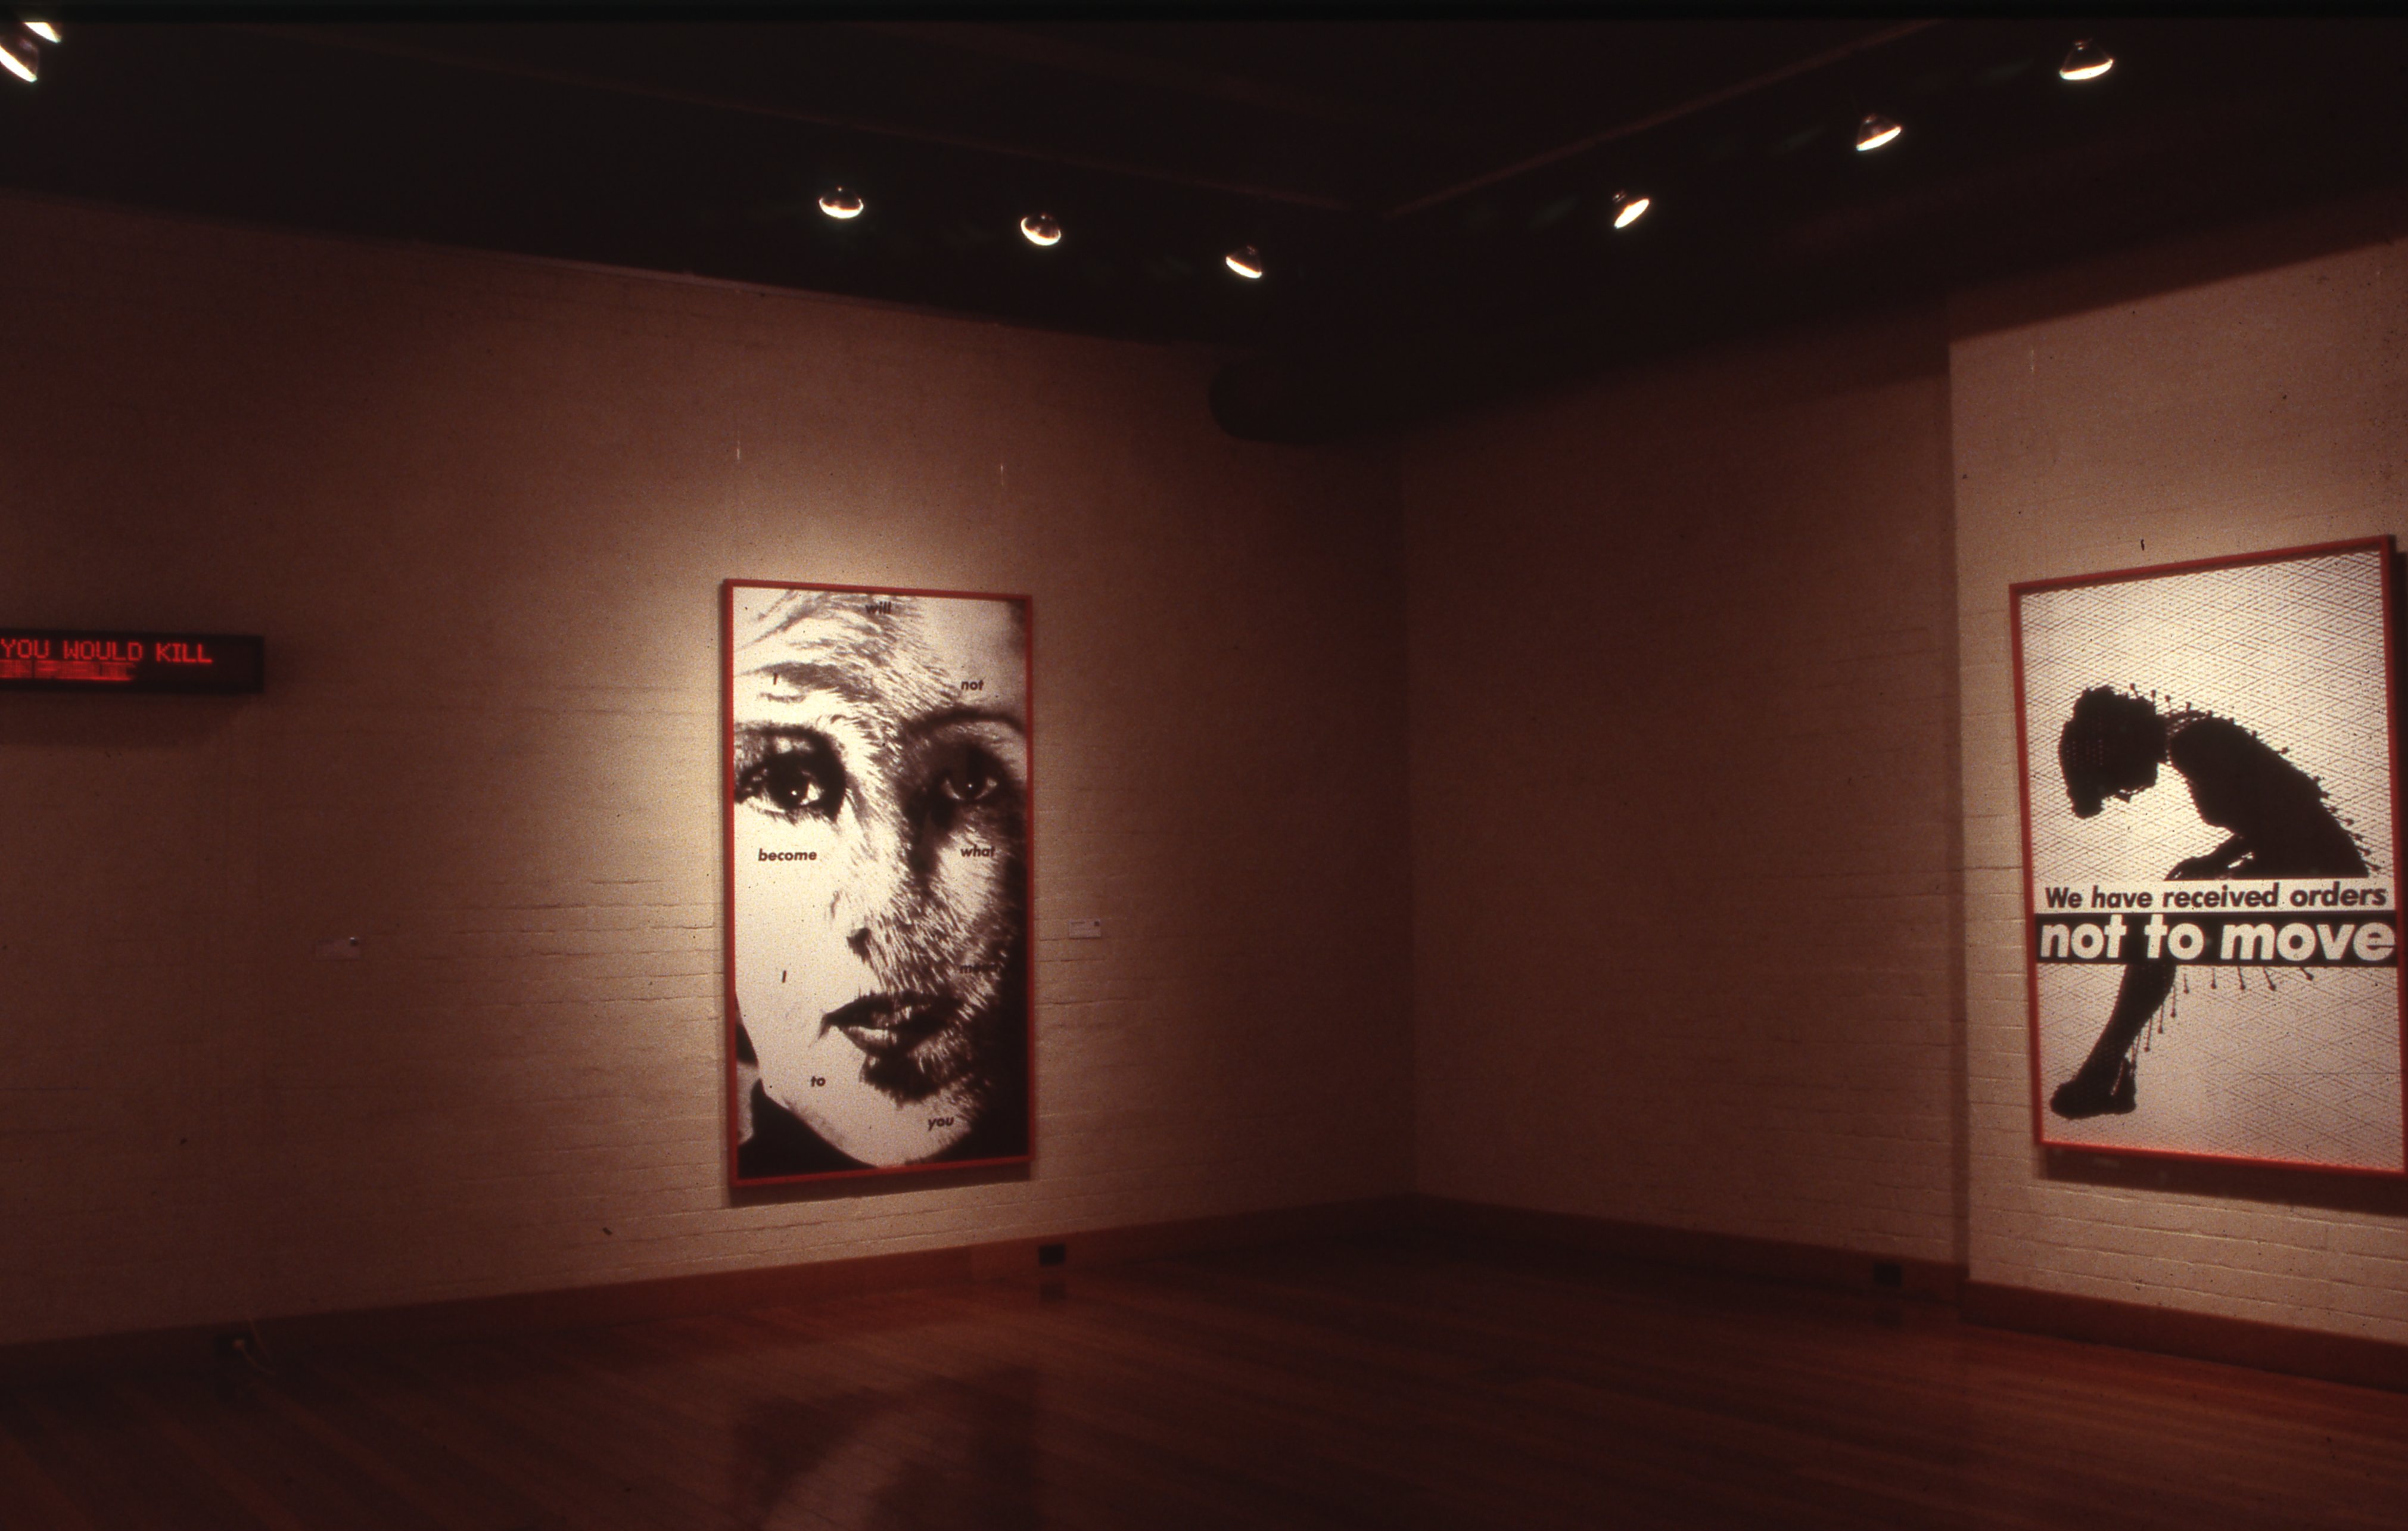 idg_archive_1988_from_the_southern_cross_a_view_of_the_world_art_c._1940-1988_the_australian_biennale_003_install.jpg